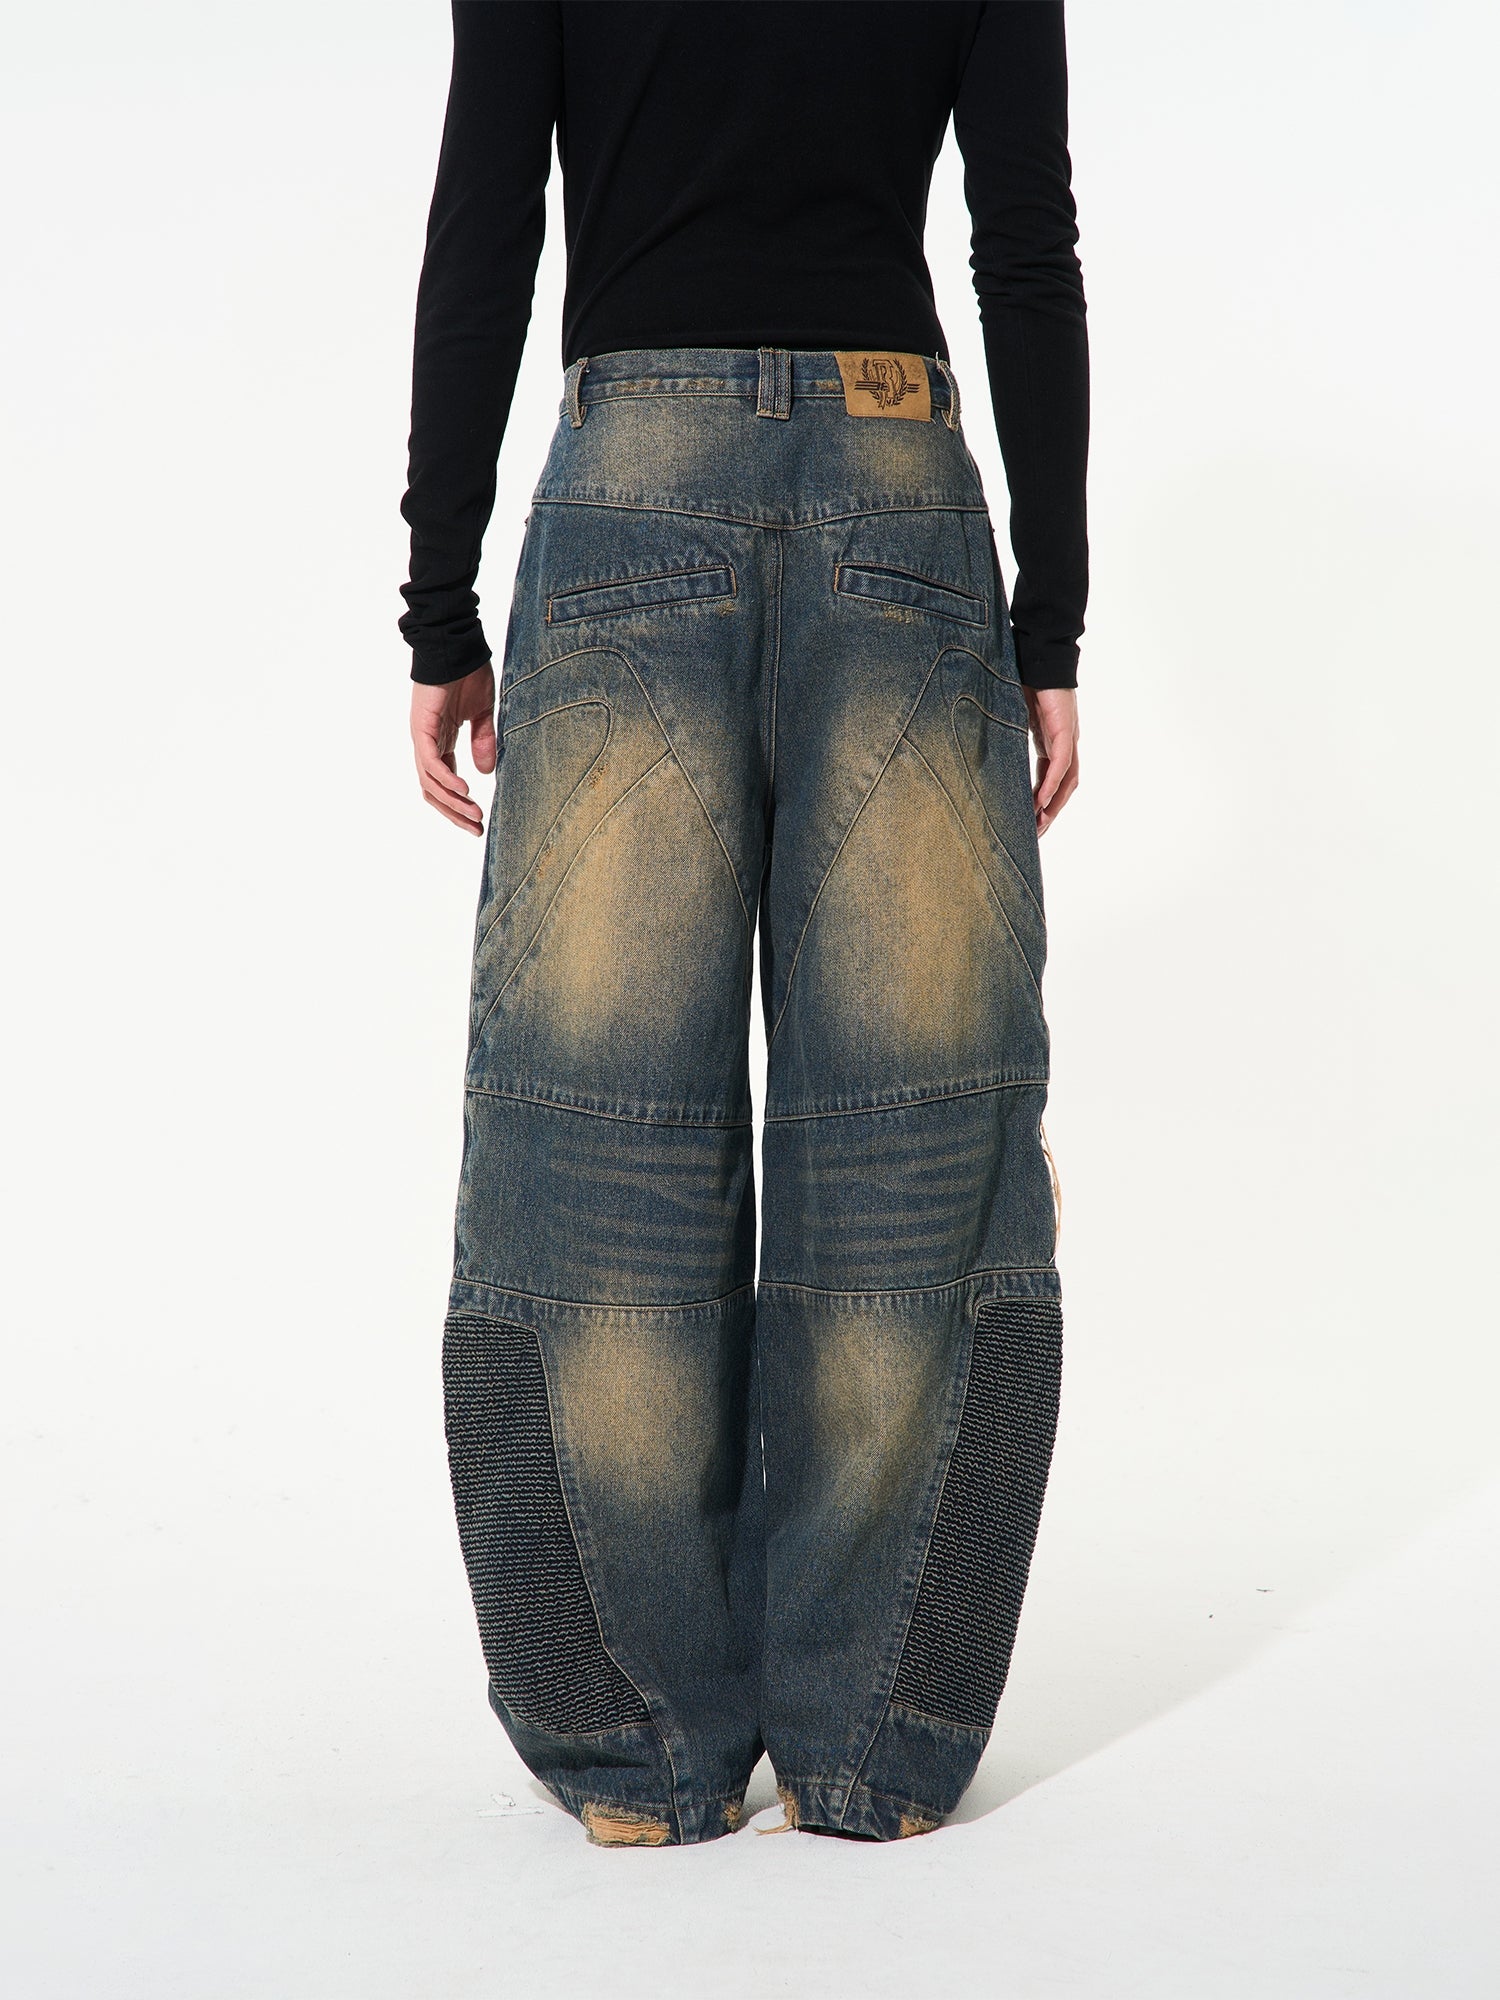 Carnage Jeans